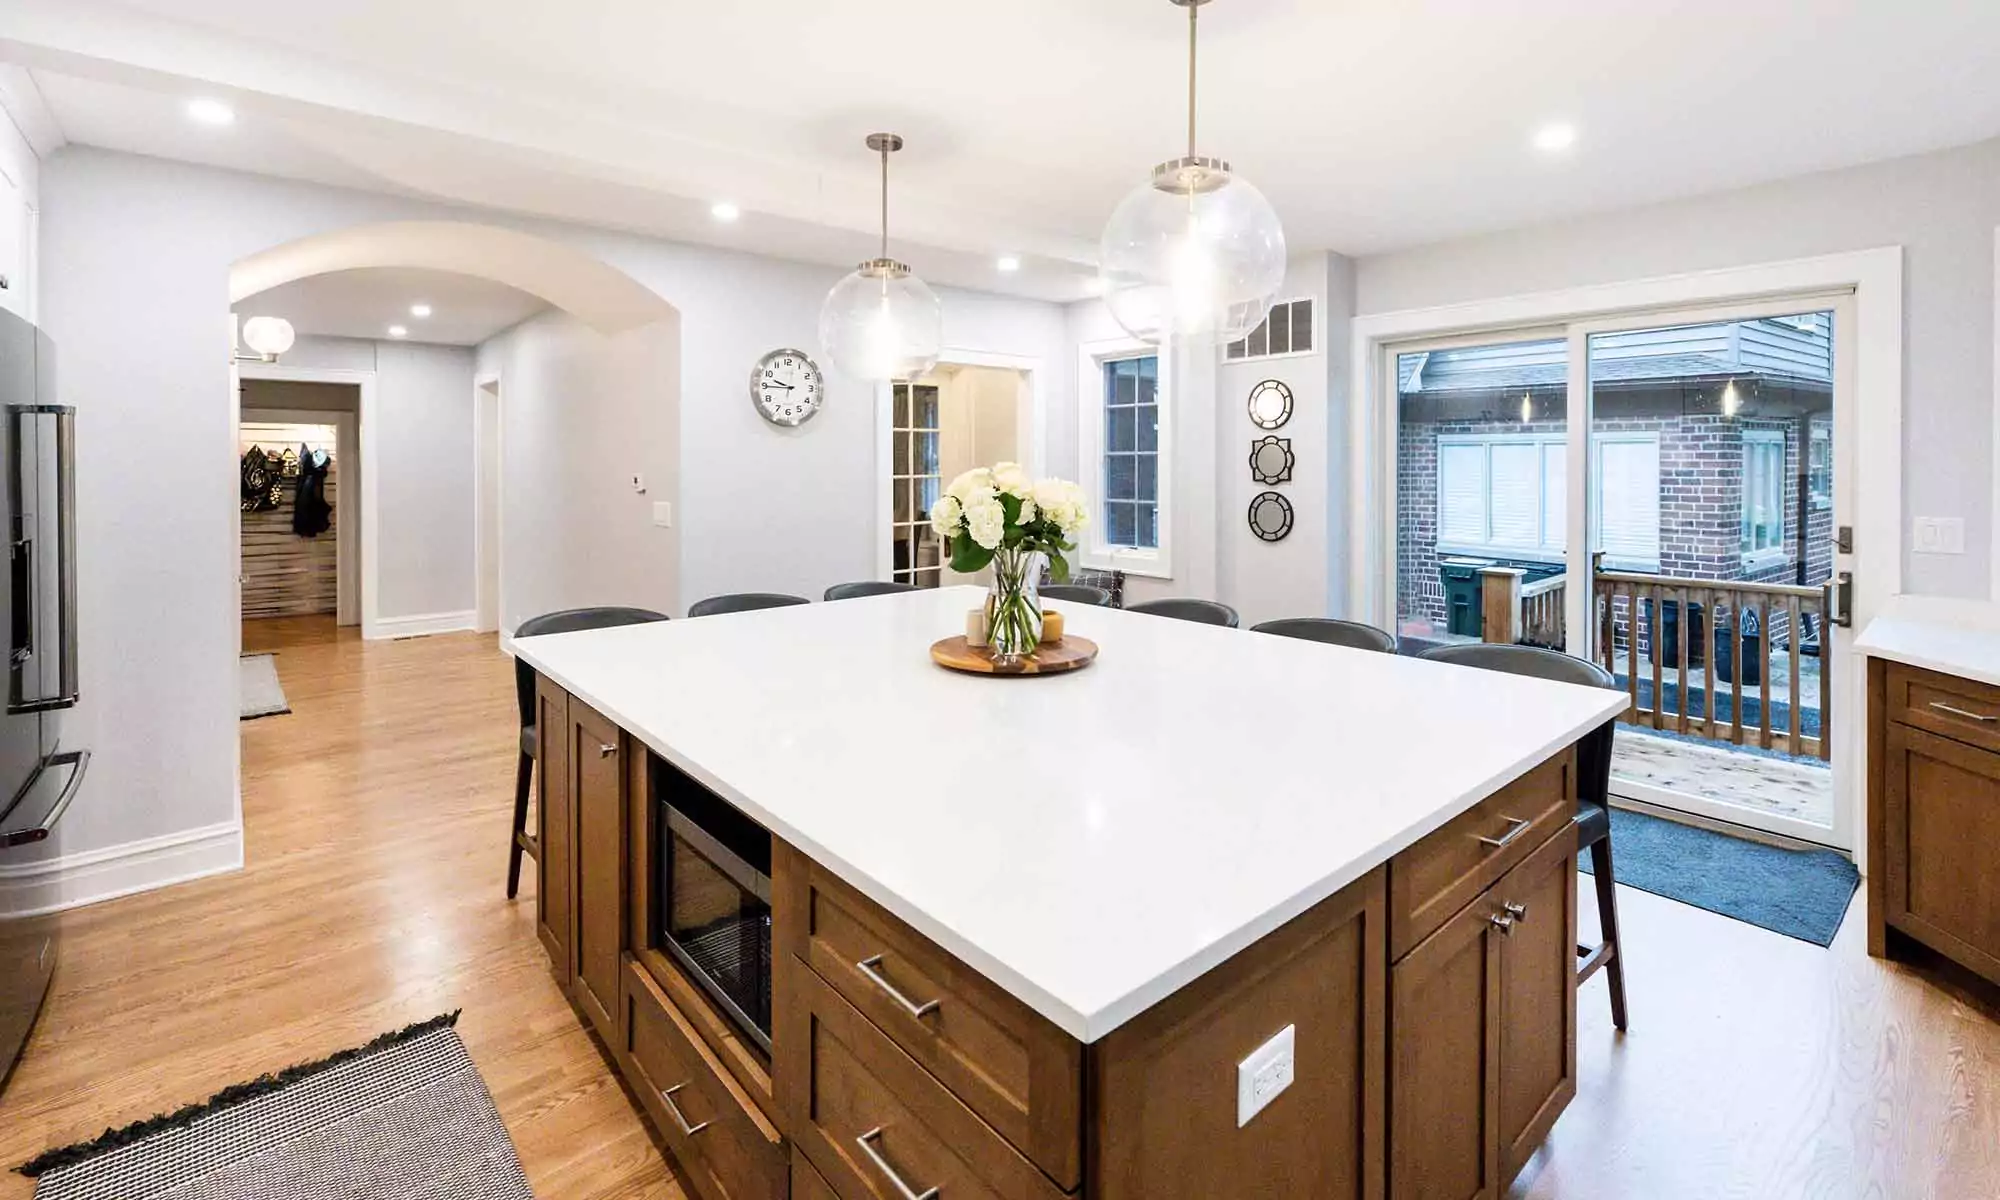 large kitchen island in luxury remodel with eight windows and white quartz countertops